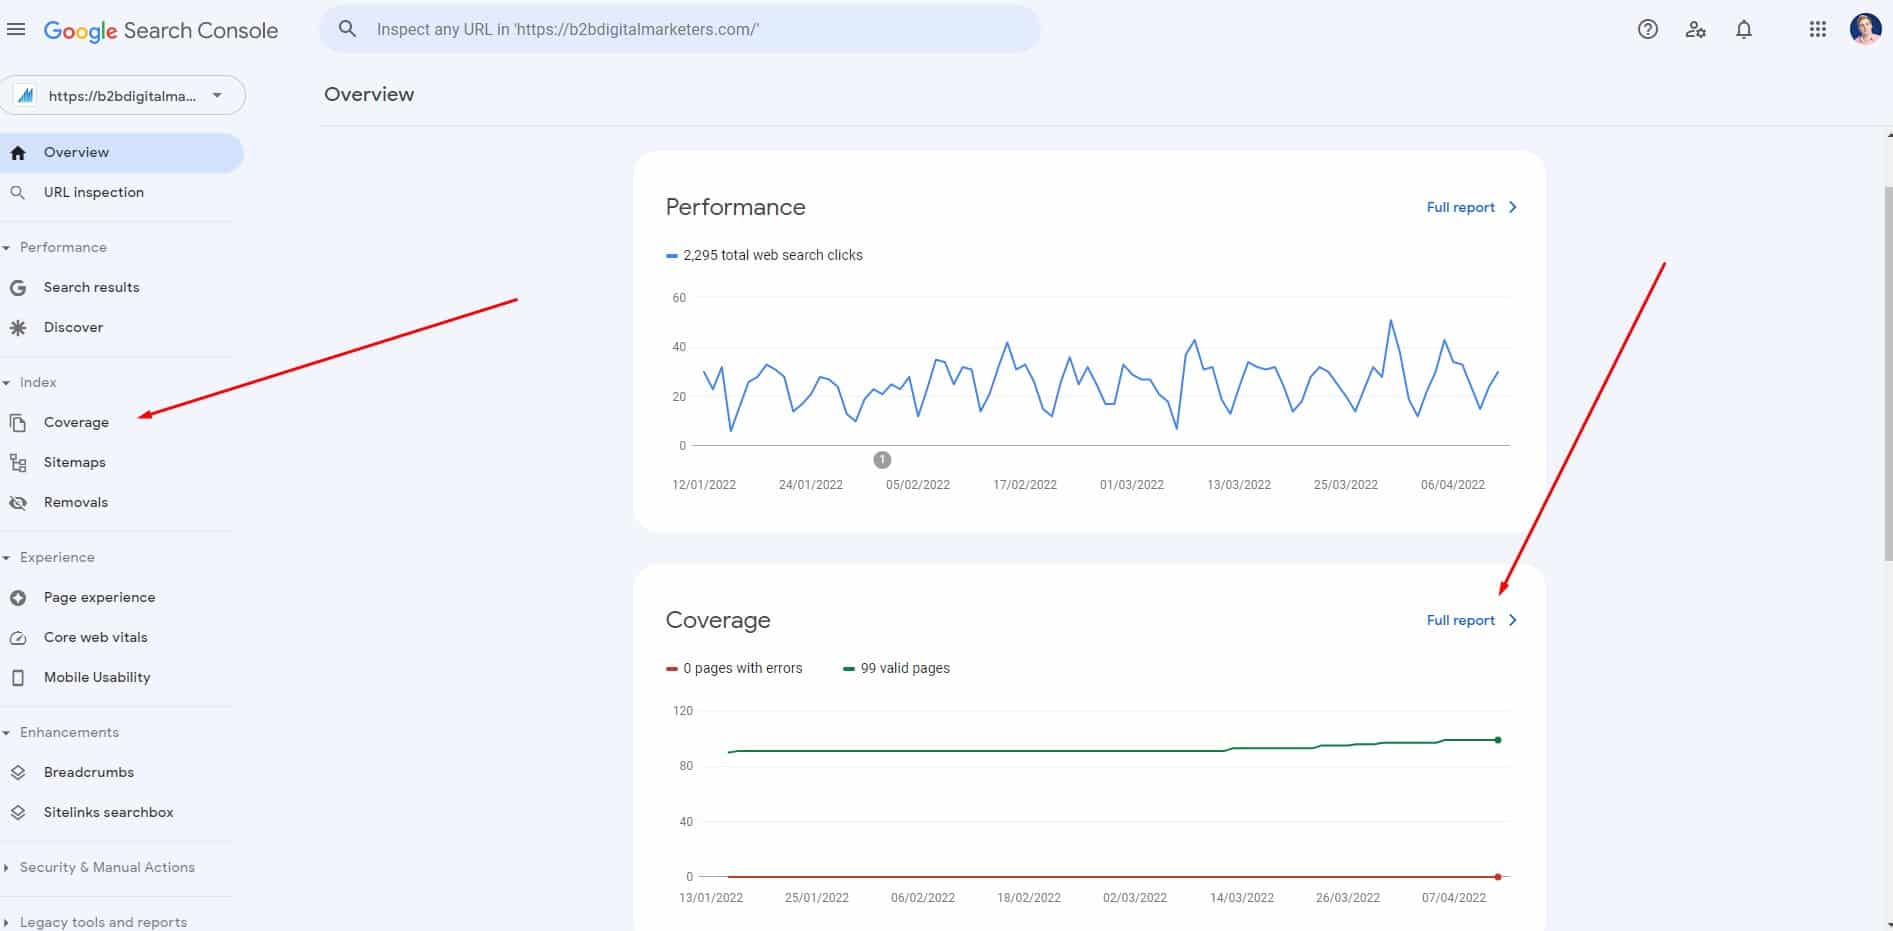 google search console overview report for how to find all webpages